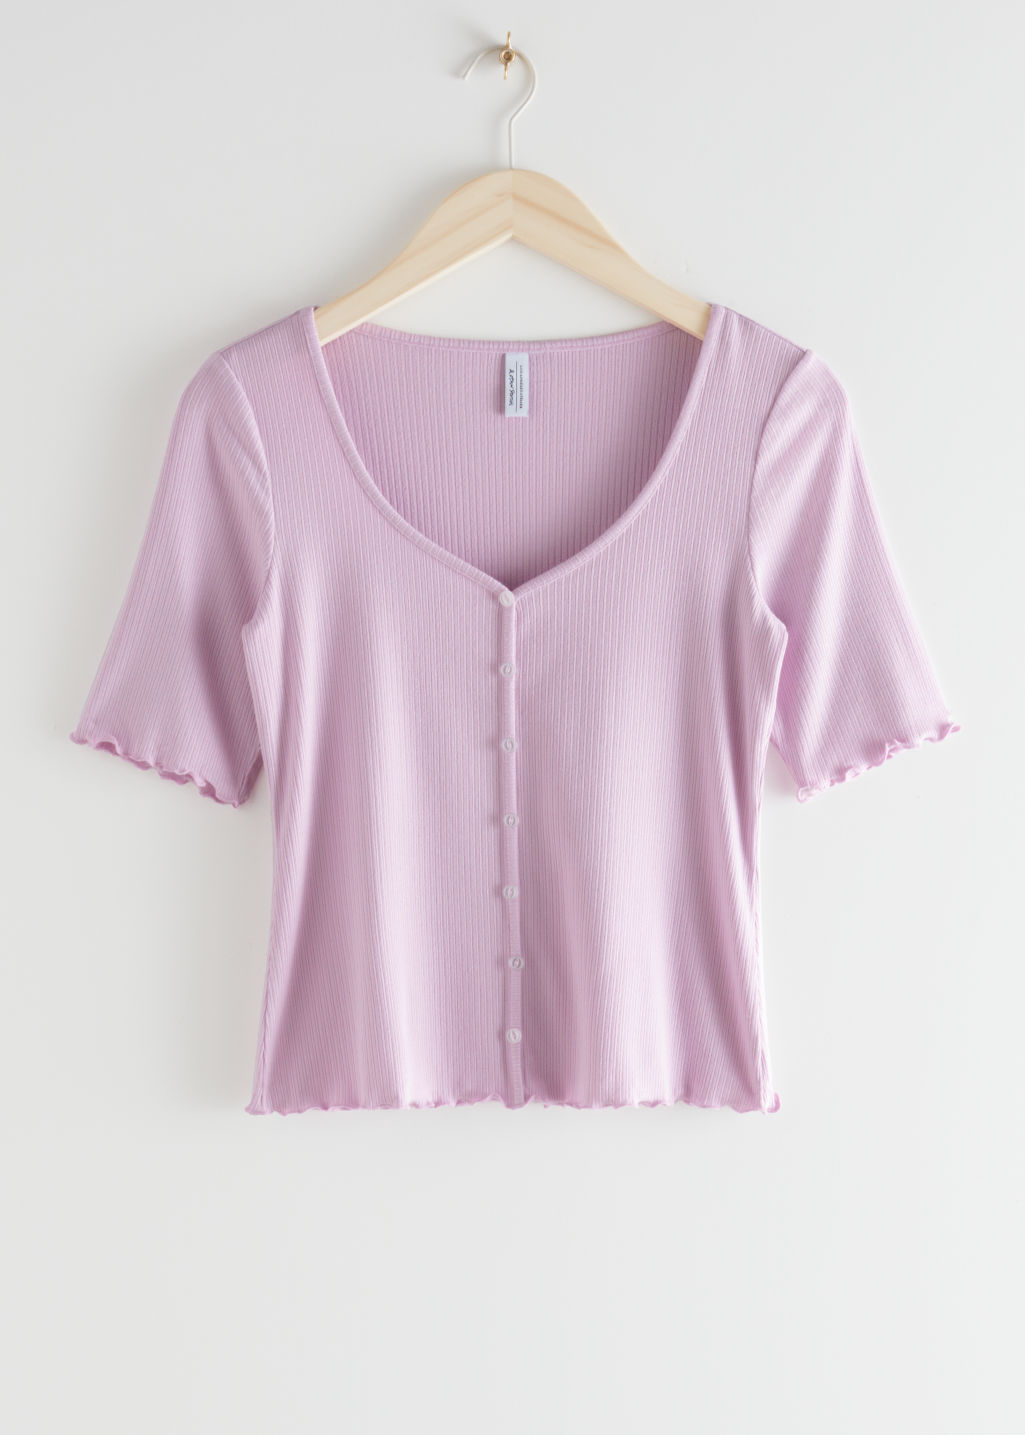 Ribbed Scoop Neck Top - Lilac - Tops & T-shirts - & Other Stories